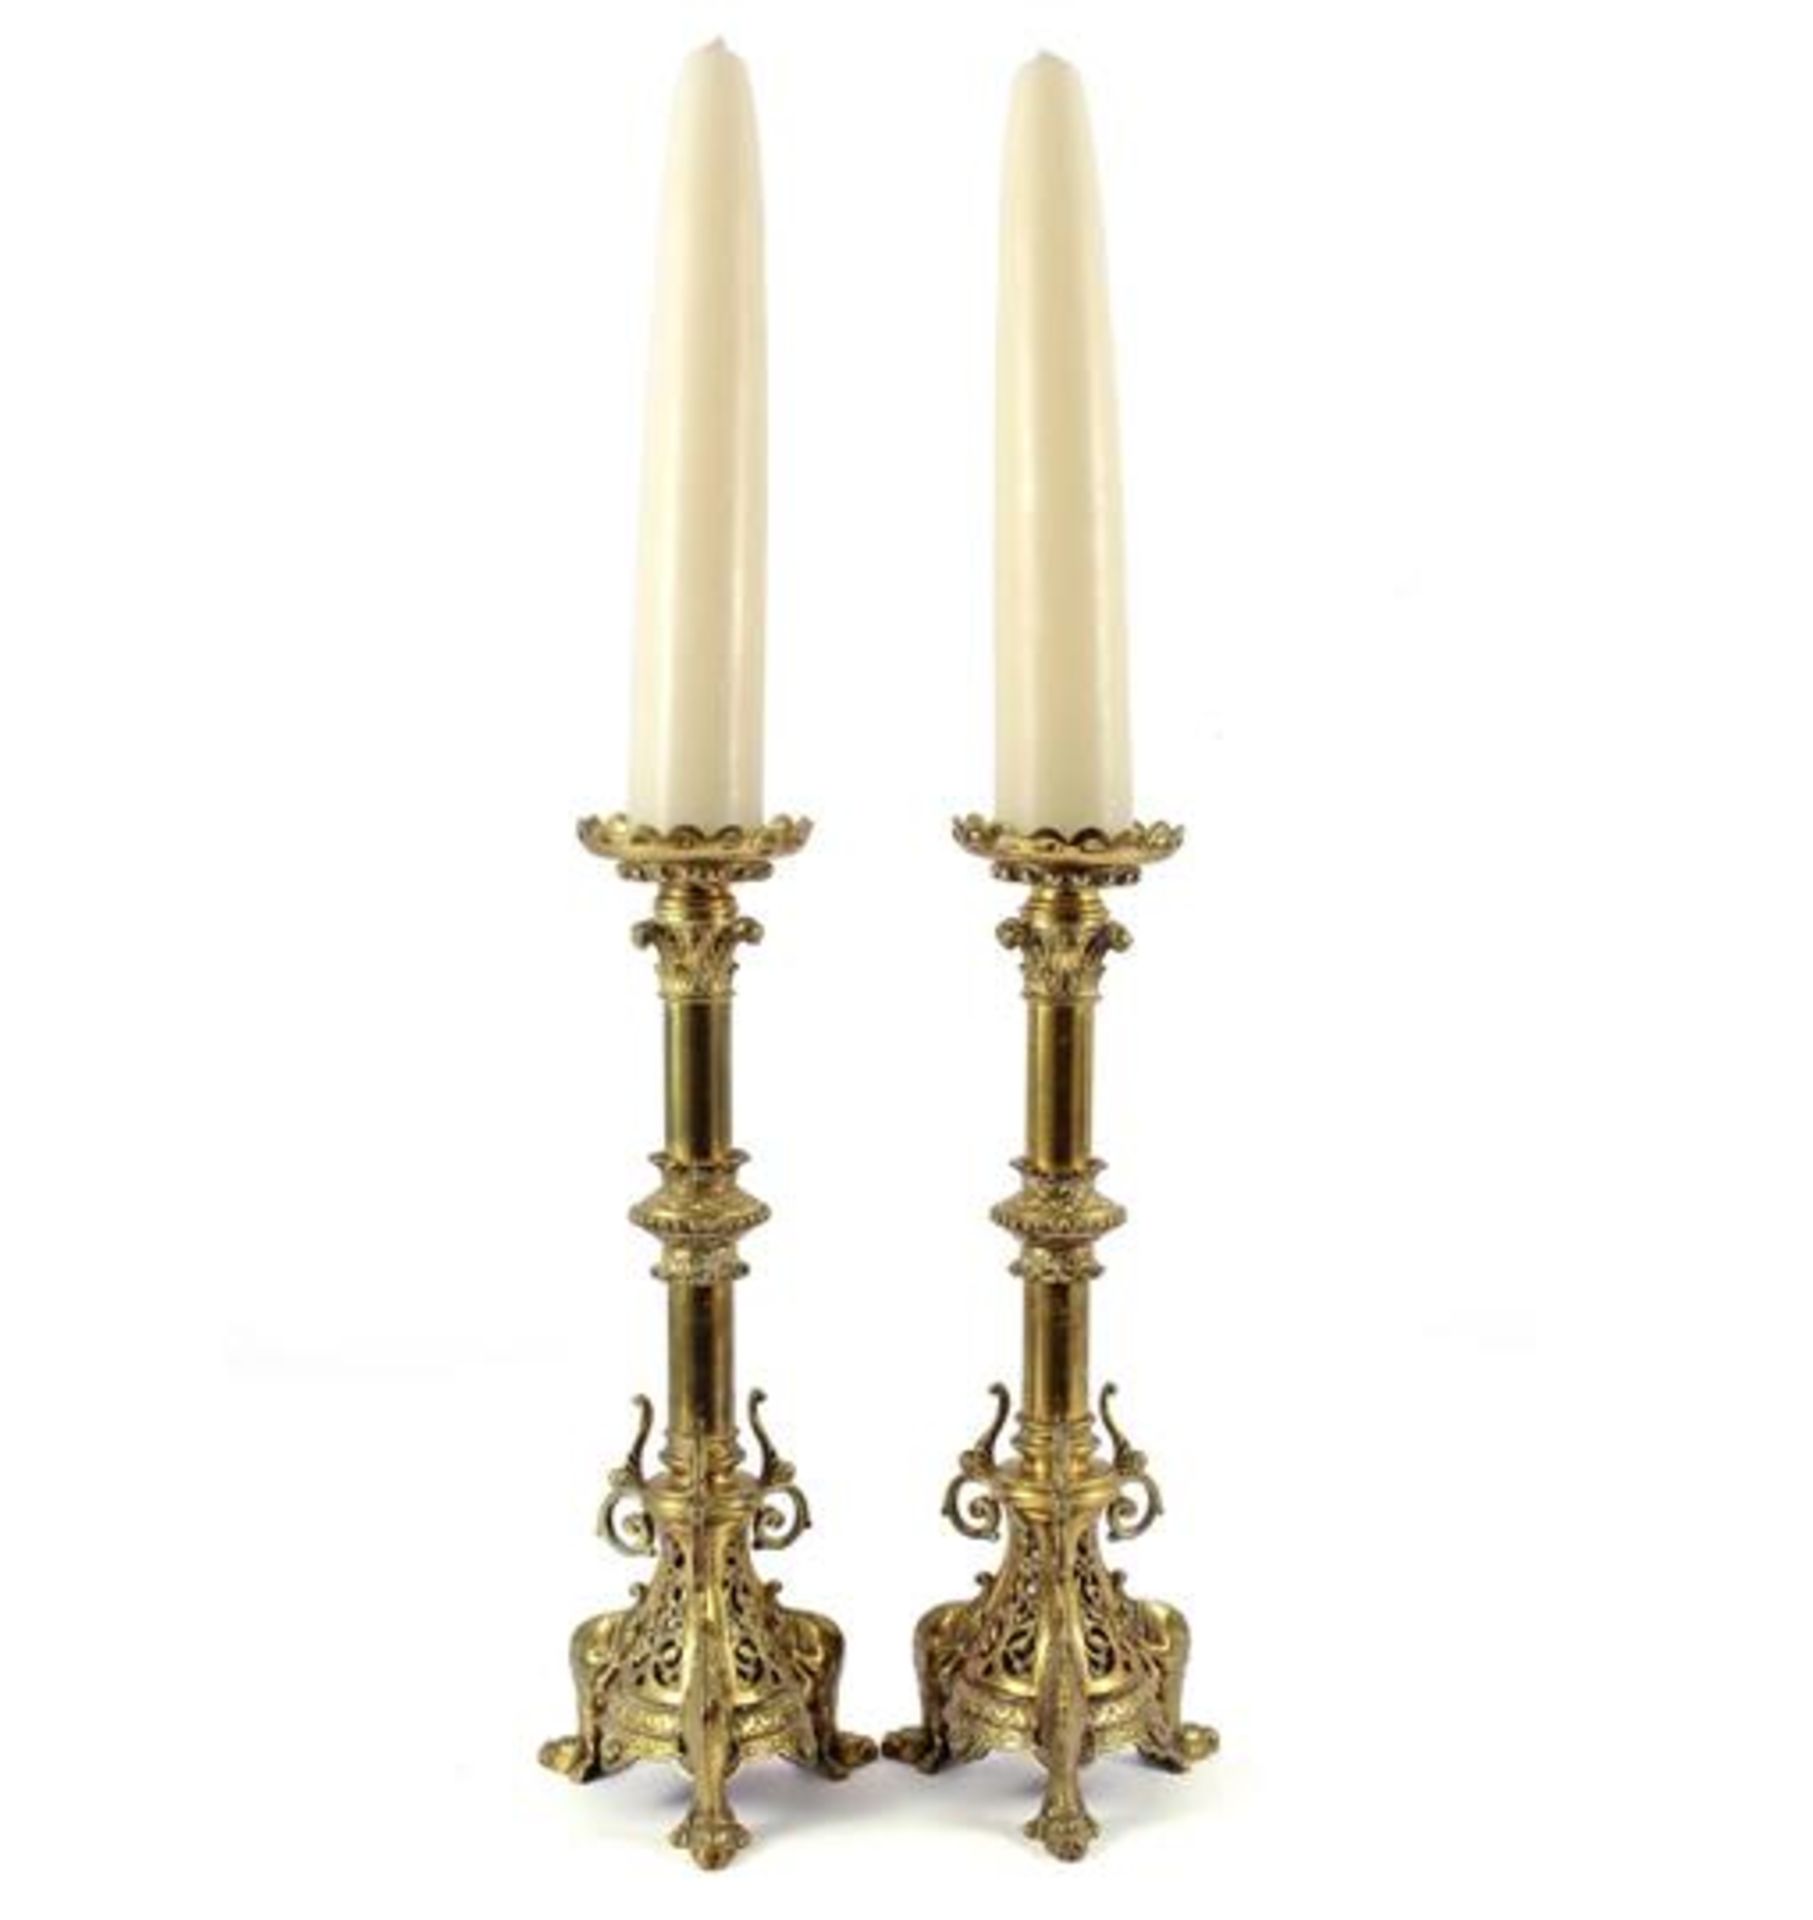 2 copper richly decorated pin candlesticks with dogs at the base 50 cm high, with 2 candles in total